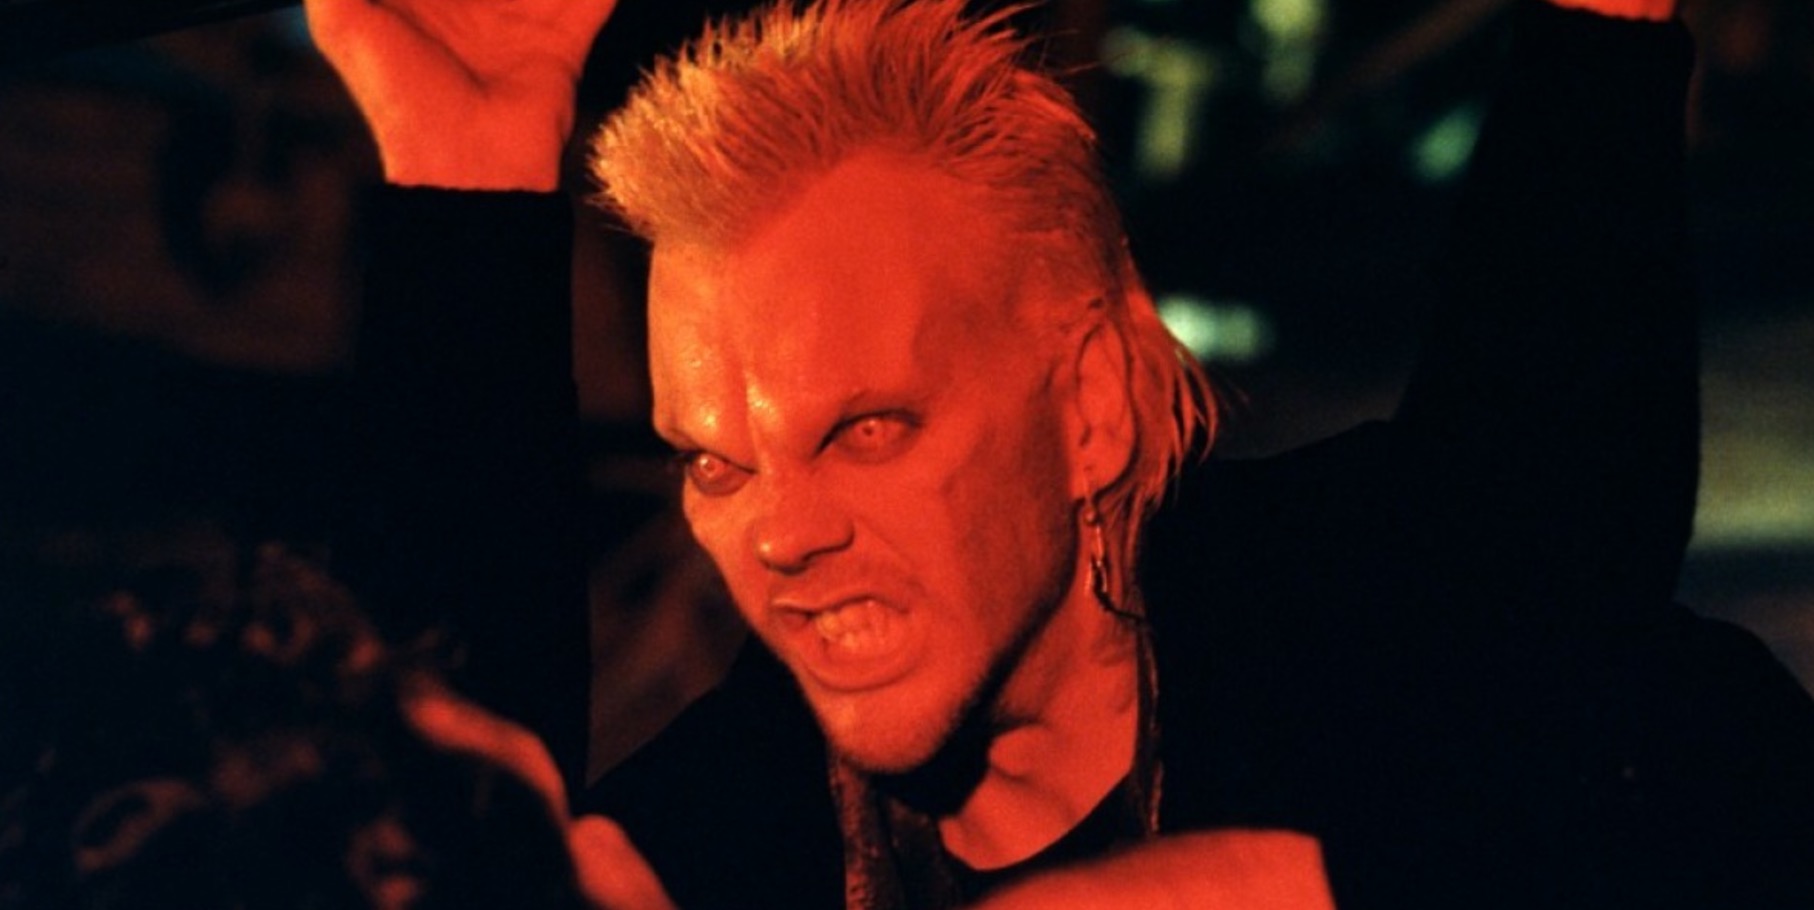 12 Things I Love About The Lost Boys That Have Nothing To Do With Vampires